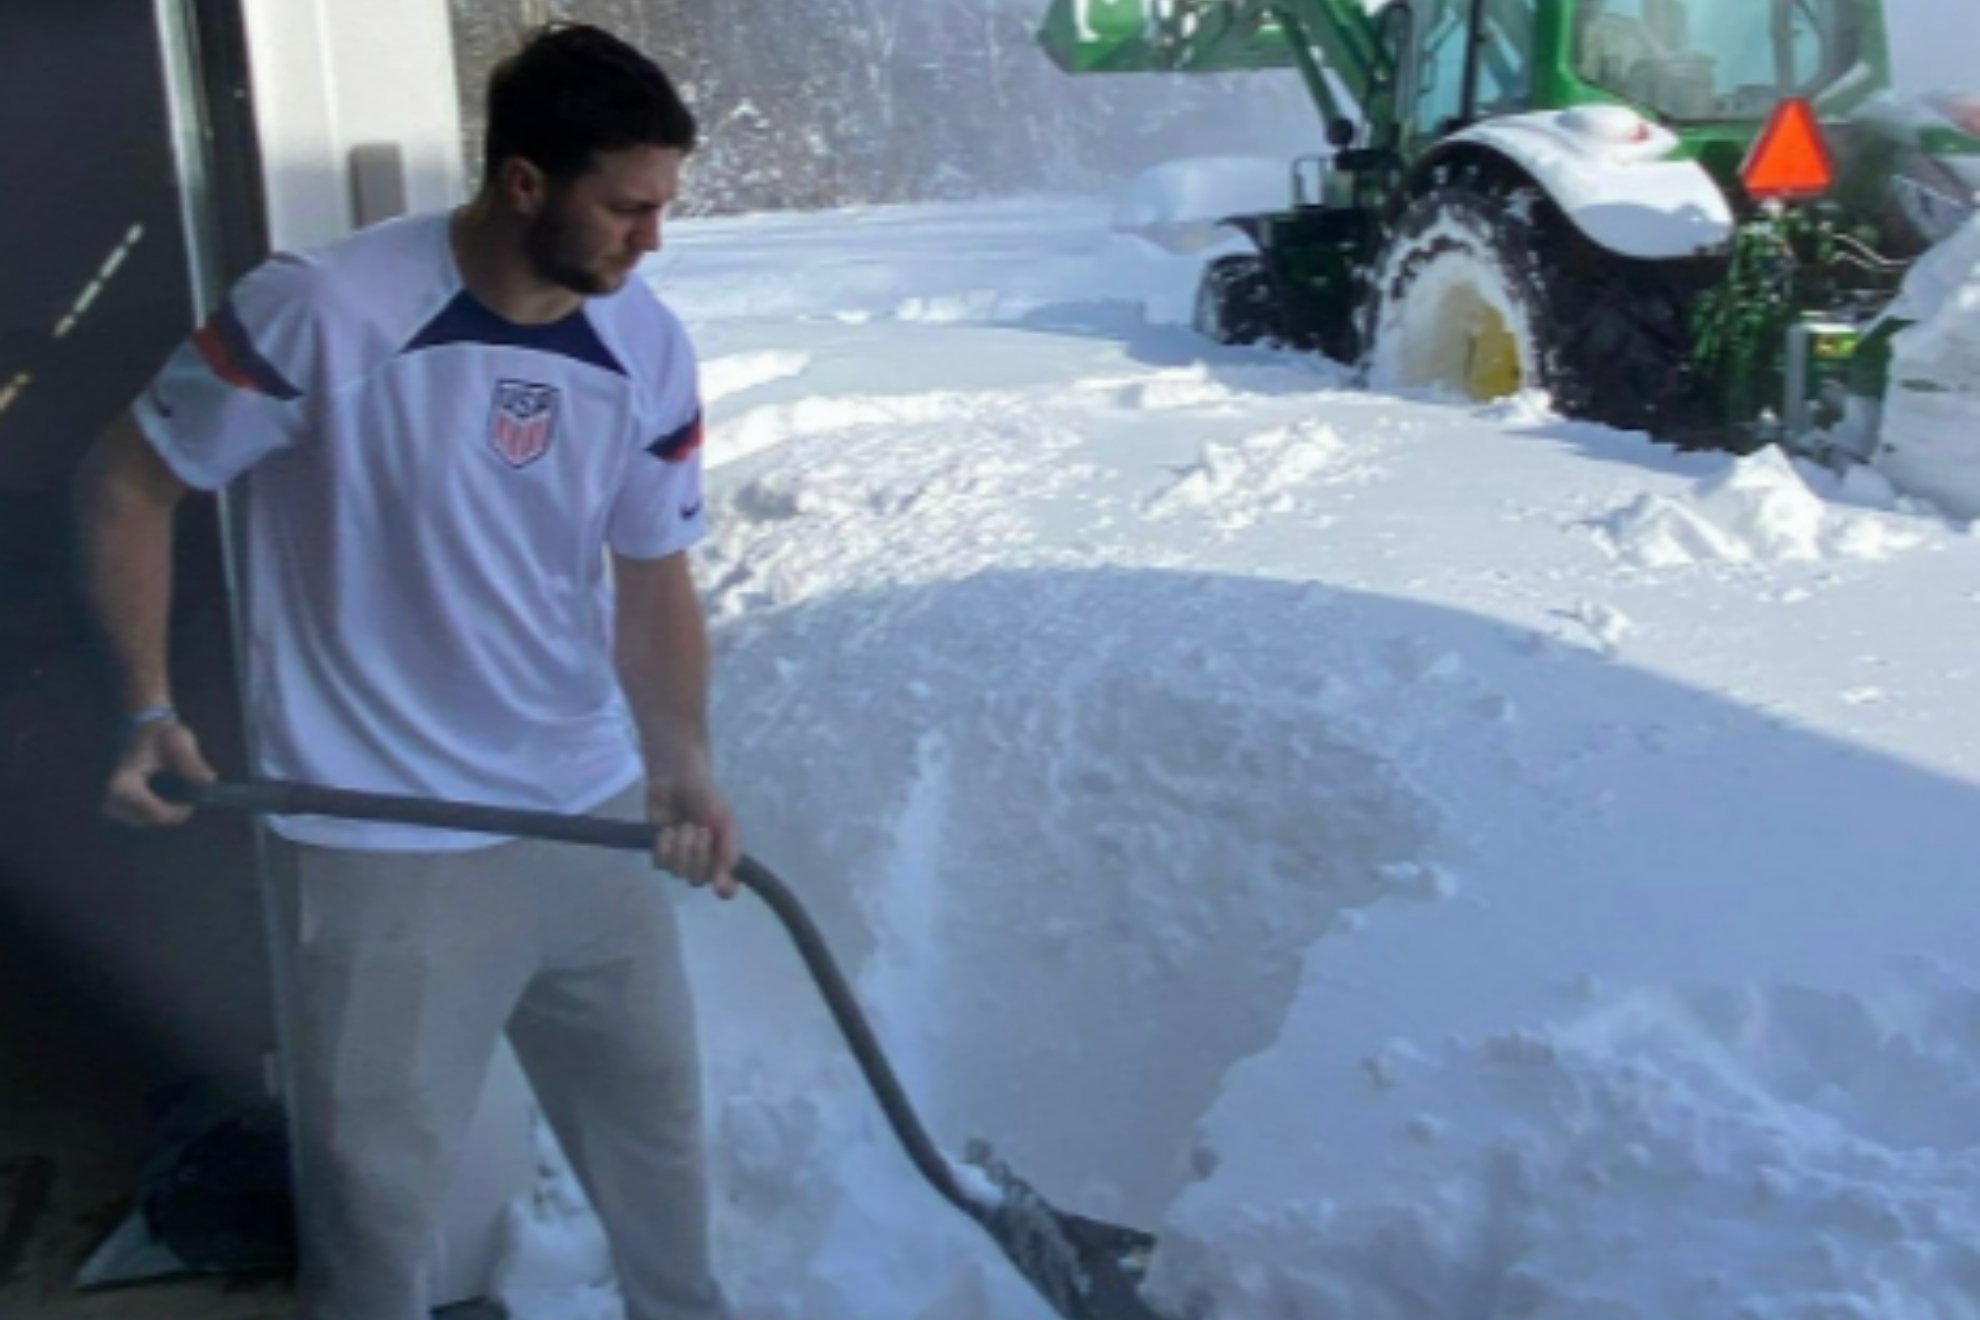 Josh Allen supports the USMNT while shoveling over six feet of snow to get to the Lions' game